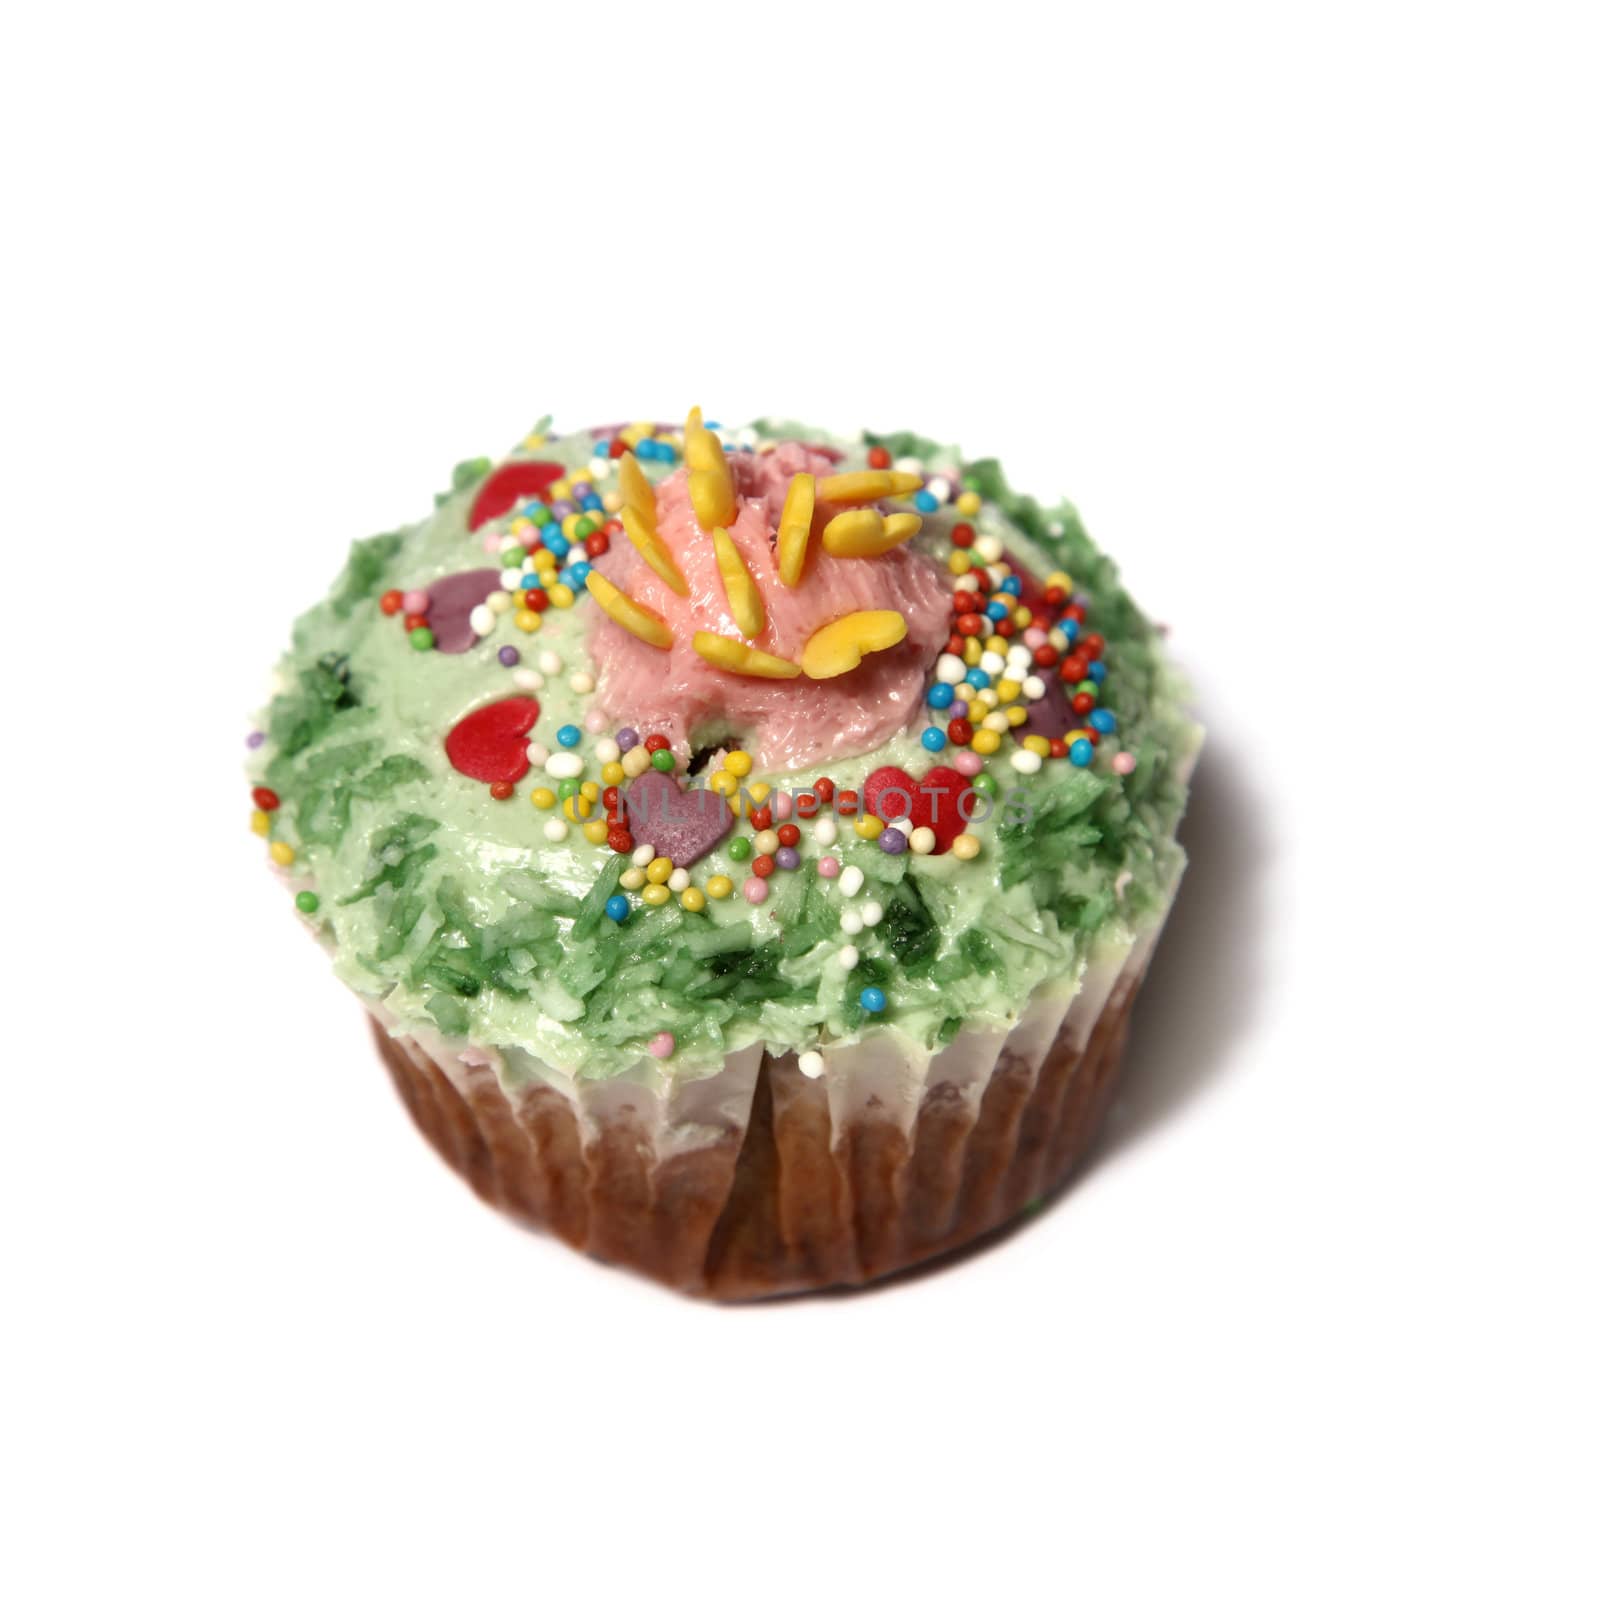 Cupcake - homemade - on a white background - square